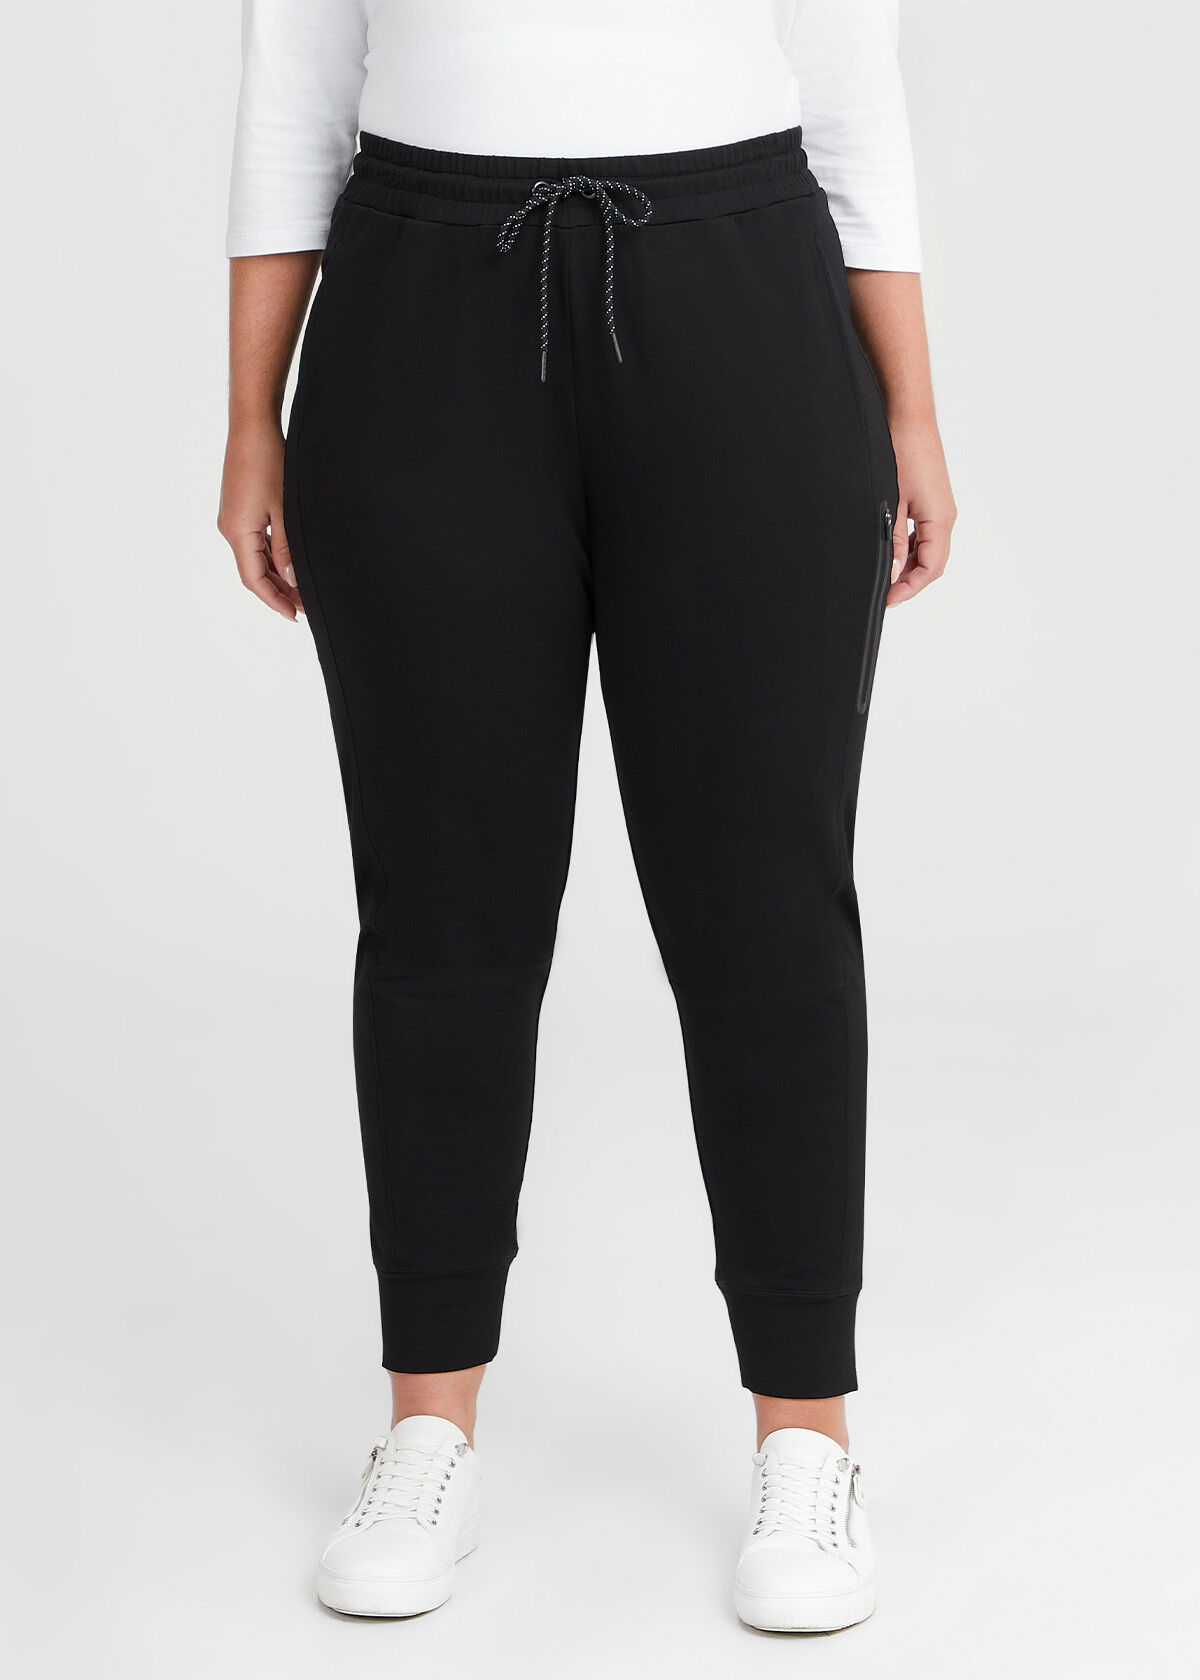 Rute Women Plus Size Black Joggers Price in India Full Specifications   Offers  DTashioncom